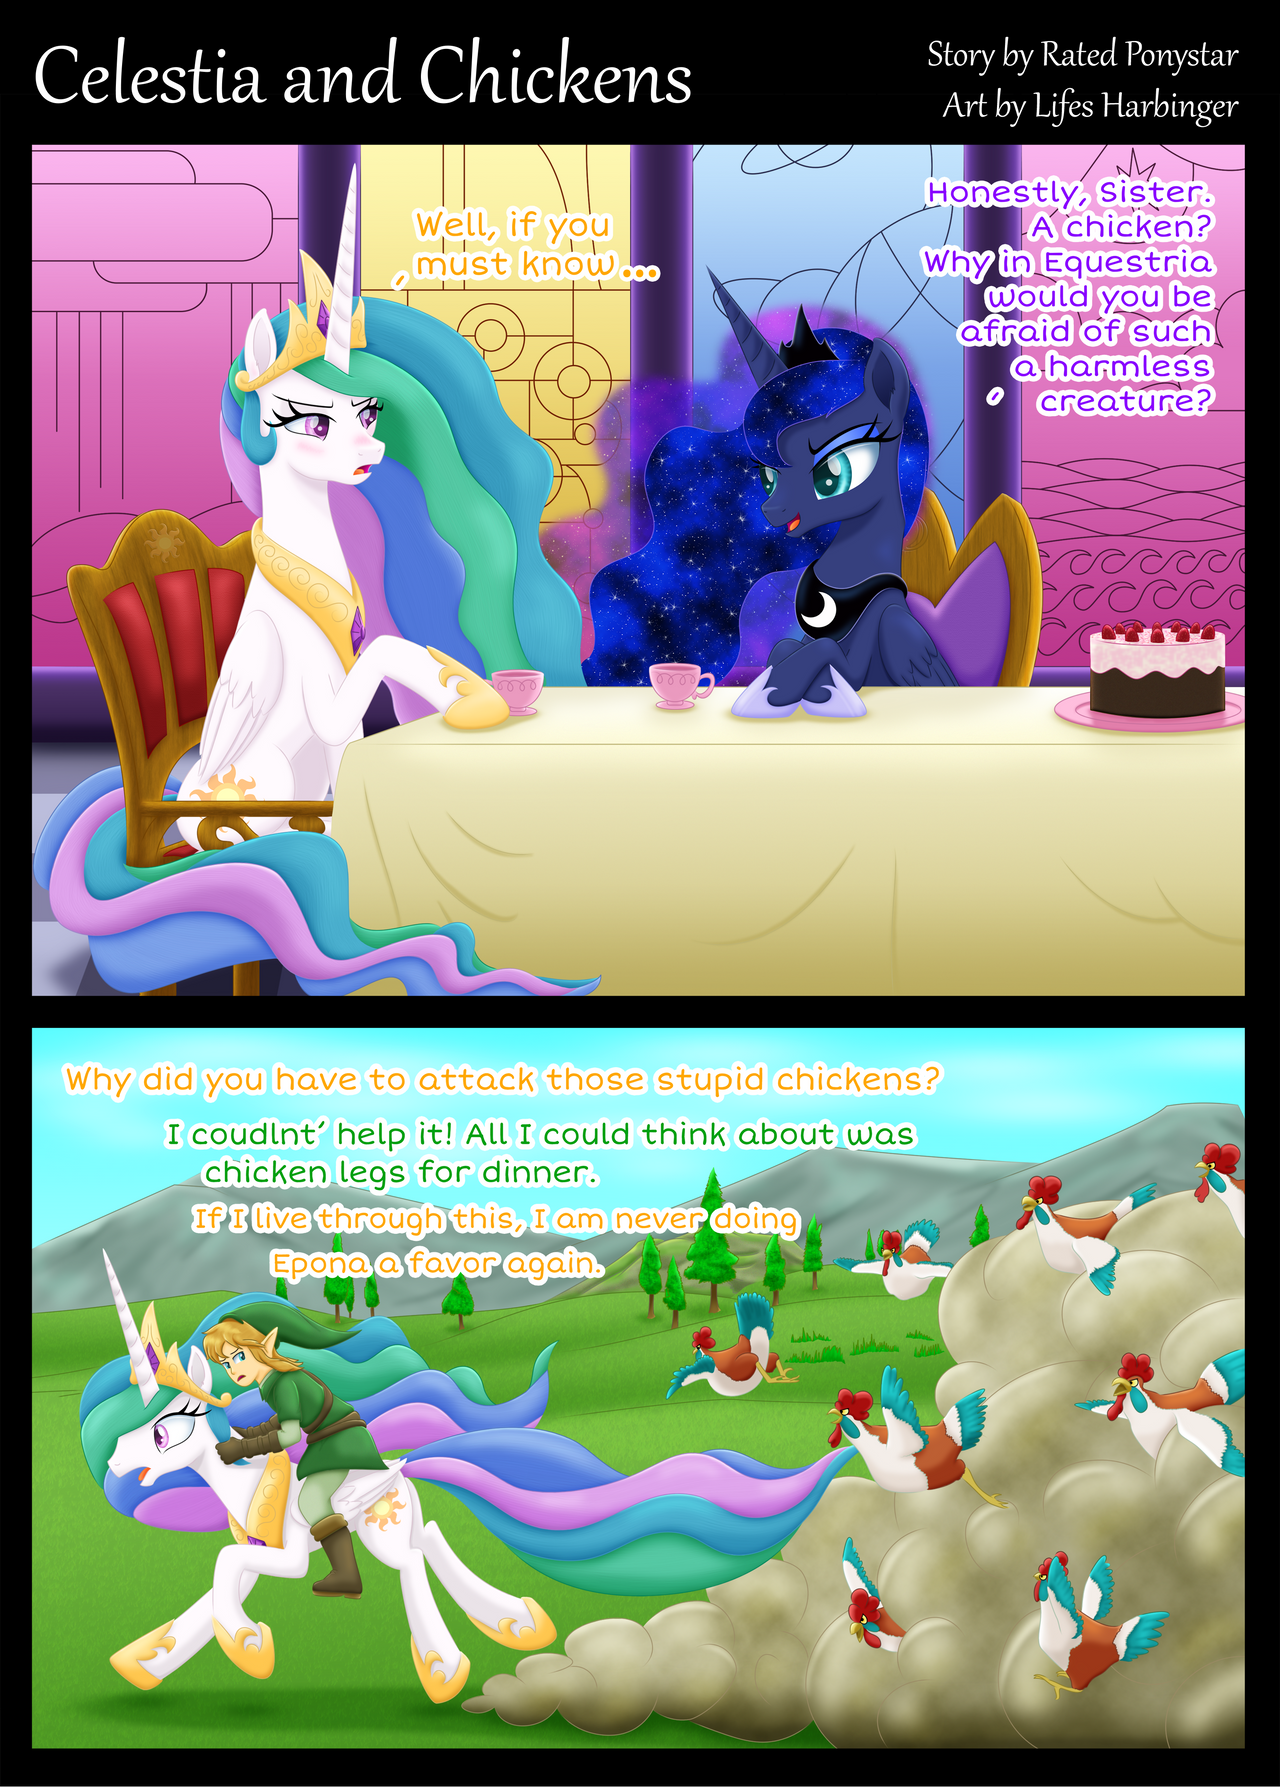 celestia_and_chickens_by_lifesharbinger_dde2phq-fullview.png